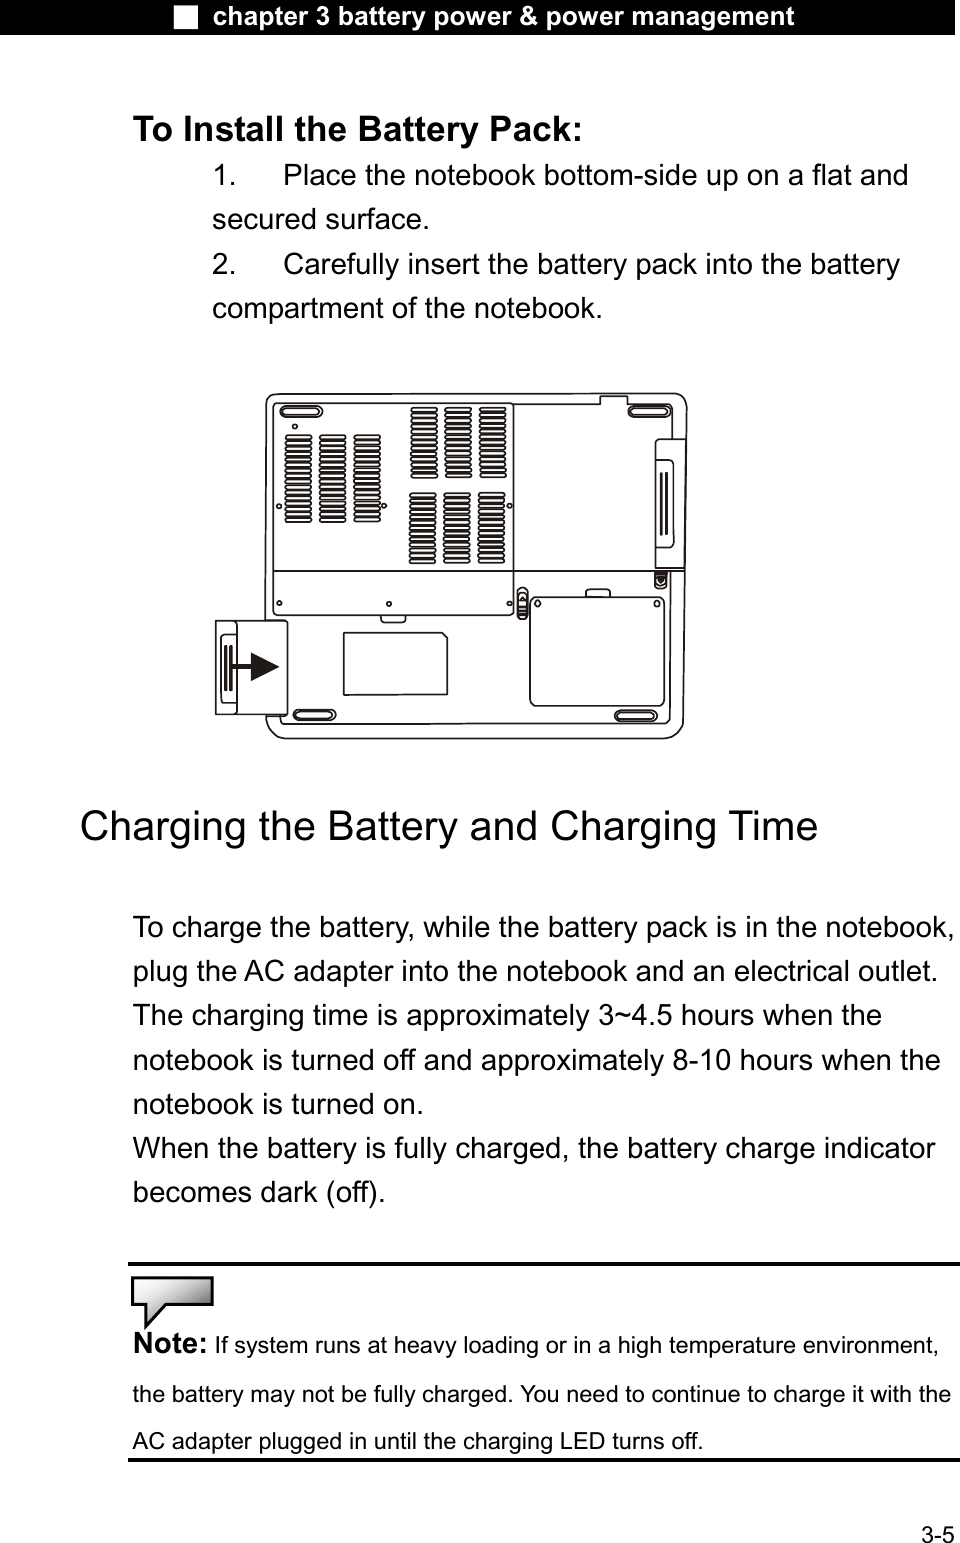 Ϯ chapter 3 battery power &amp; power managementTo Install the Battery Pack: 1. Place the notebook bottom-side up on a flat and secured surface.2. Carefully insert the battery pack into the batterycompartment of the notebook.Charging the Battery and Charging TimeTo charge the battery, while the battery pack is in the notebook,plug the AC adapter into the notebook and an electrical outlet. The charging time is approximately 3~4.5 hours when the notebook is turned off and approximately 8-10 hours when the notebook is turned on. When the battery is fully charged, the battery charge indicatorbecomes dark (off).Note: If system runs at heavy loading or in a high temperature environment,the battery may not be fully charged. You need to continue to charge it with the AC adapter plugged in until the charging LED turns off.3-5